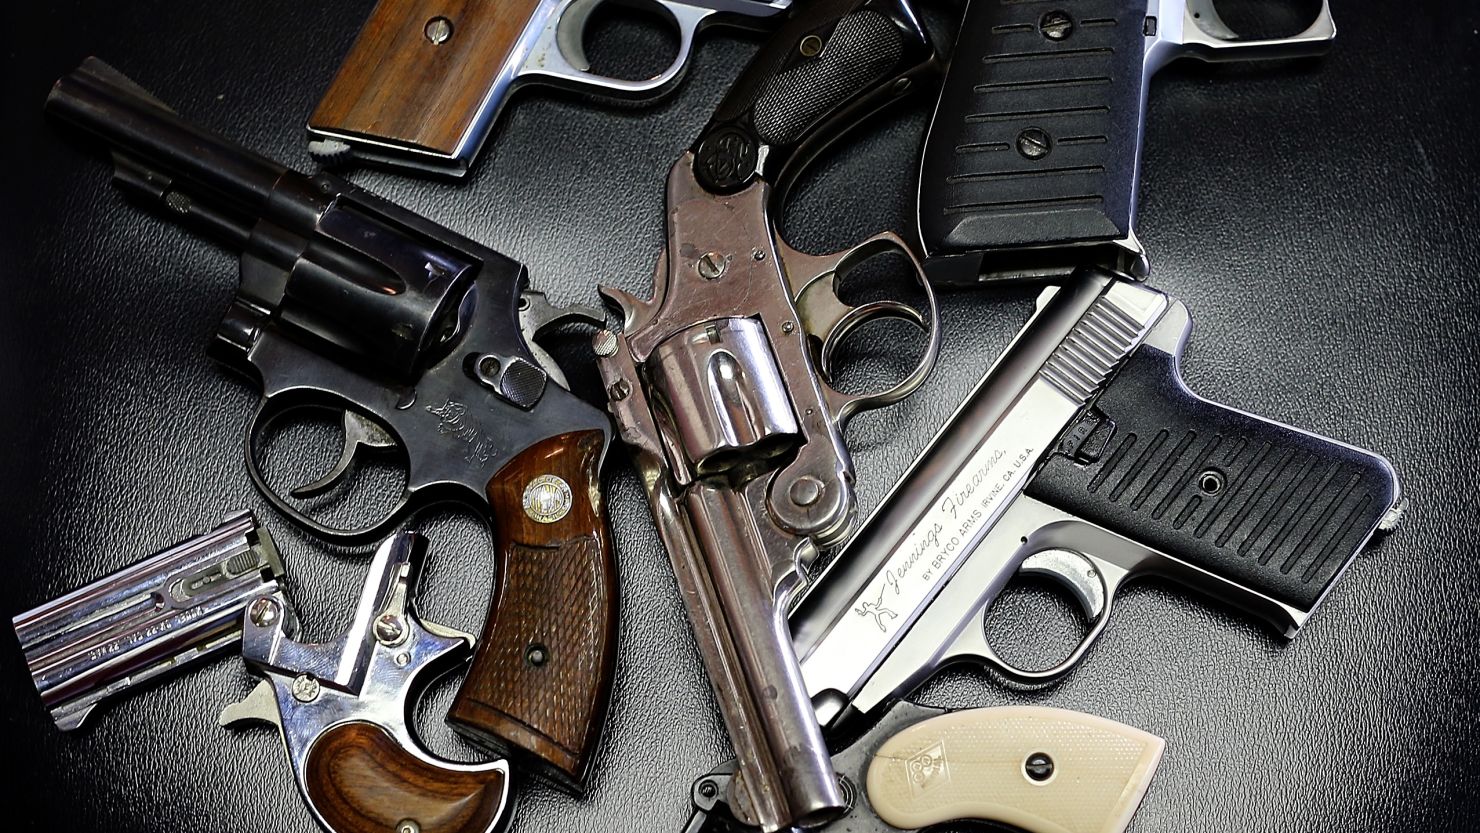 Washington's ban on carrying handguns in public is unconstitutional, a federal court has ruled.